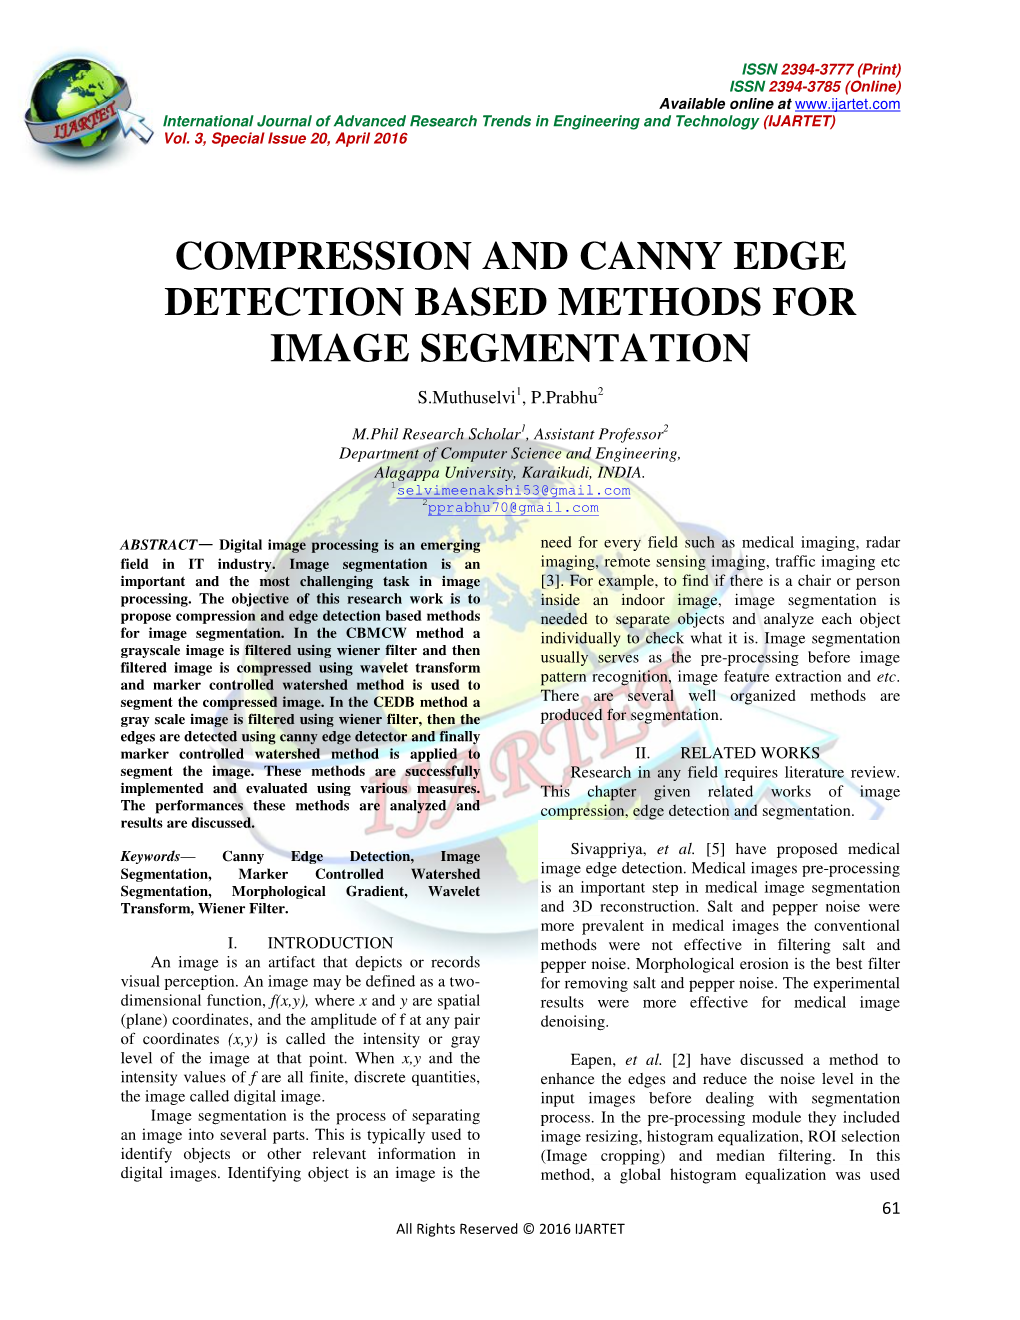 Compression and Canny Edge Detection Based Methods for Image Segmentation